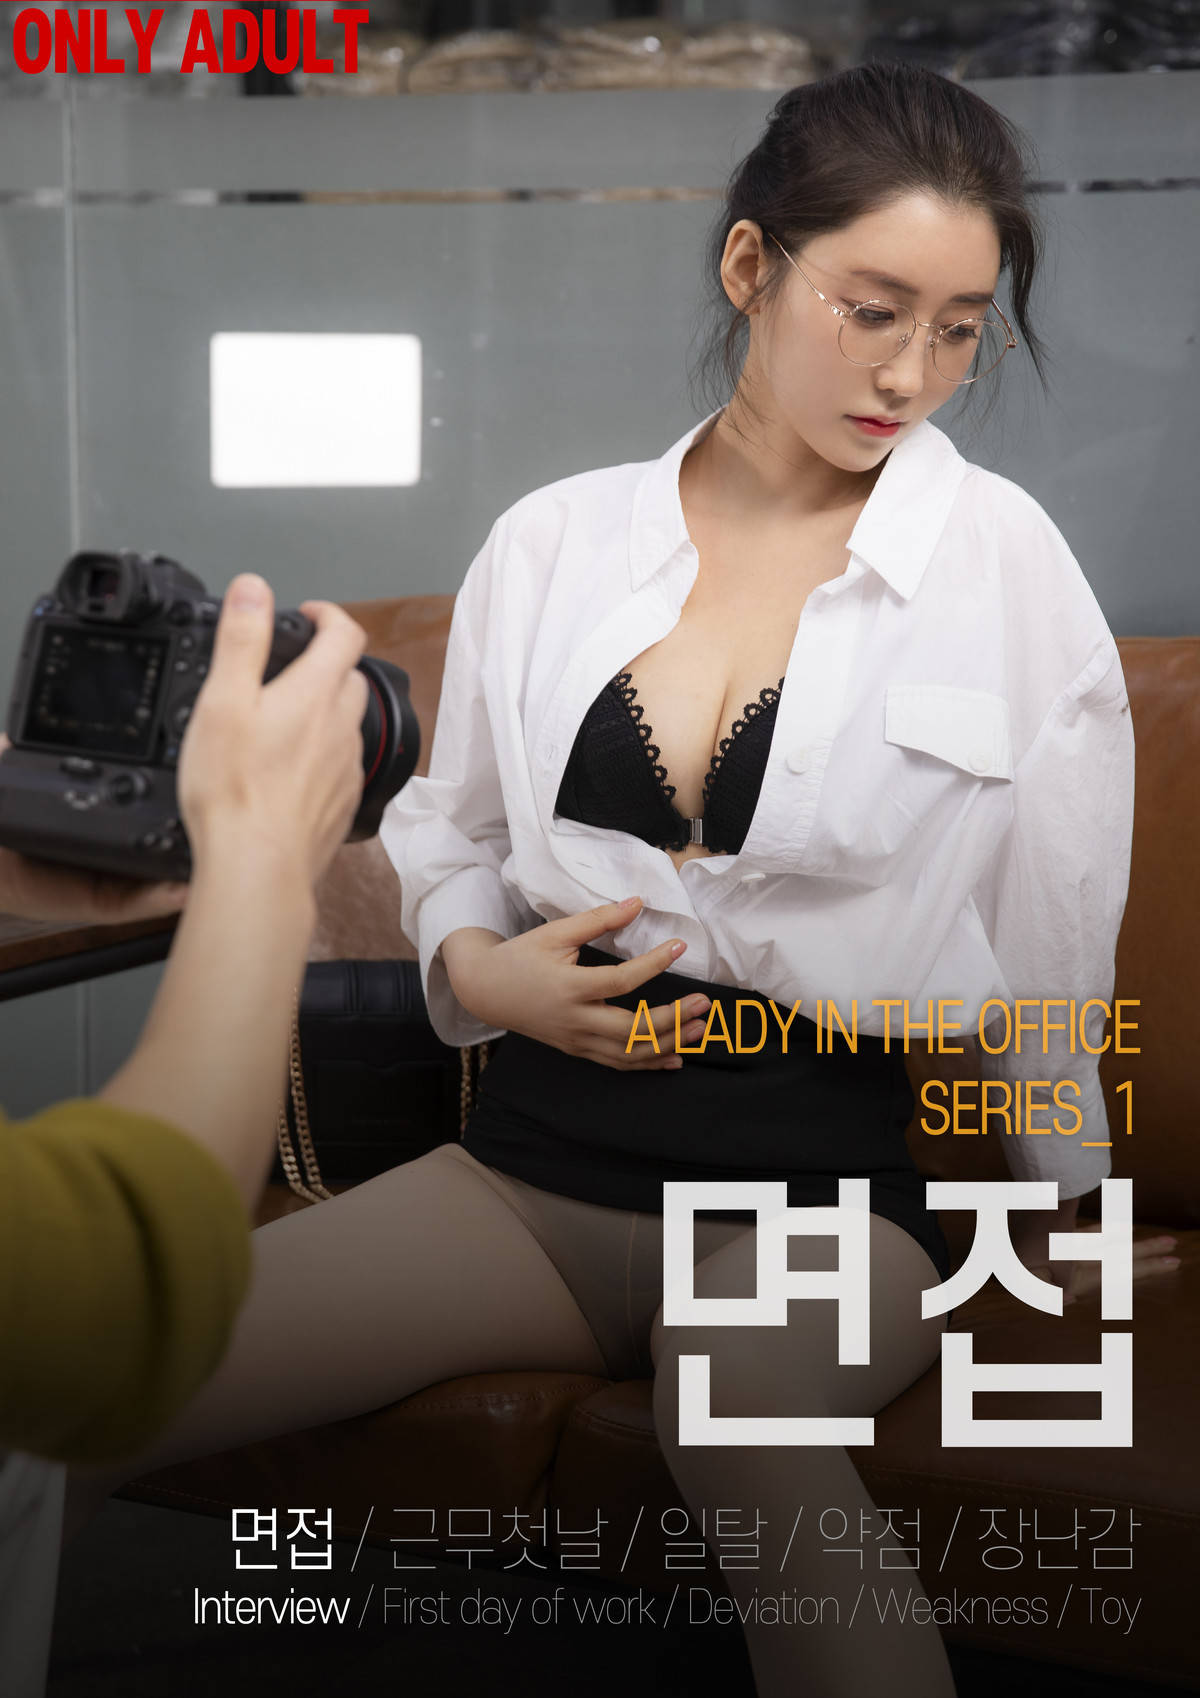 LeeHa 이하, [BUNNY] A Lady in The Office S.1